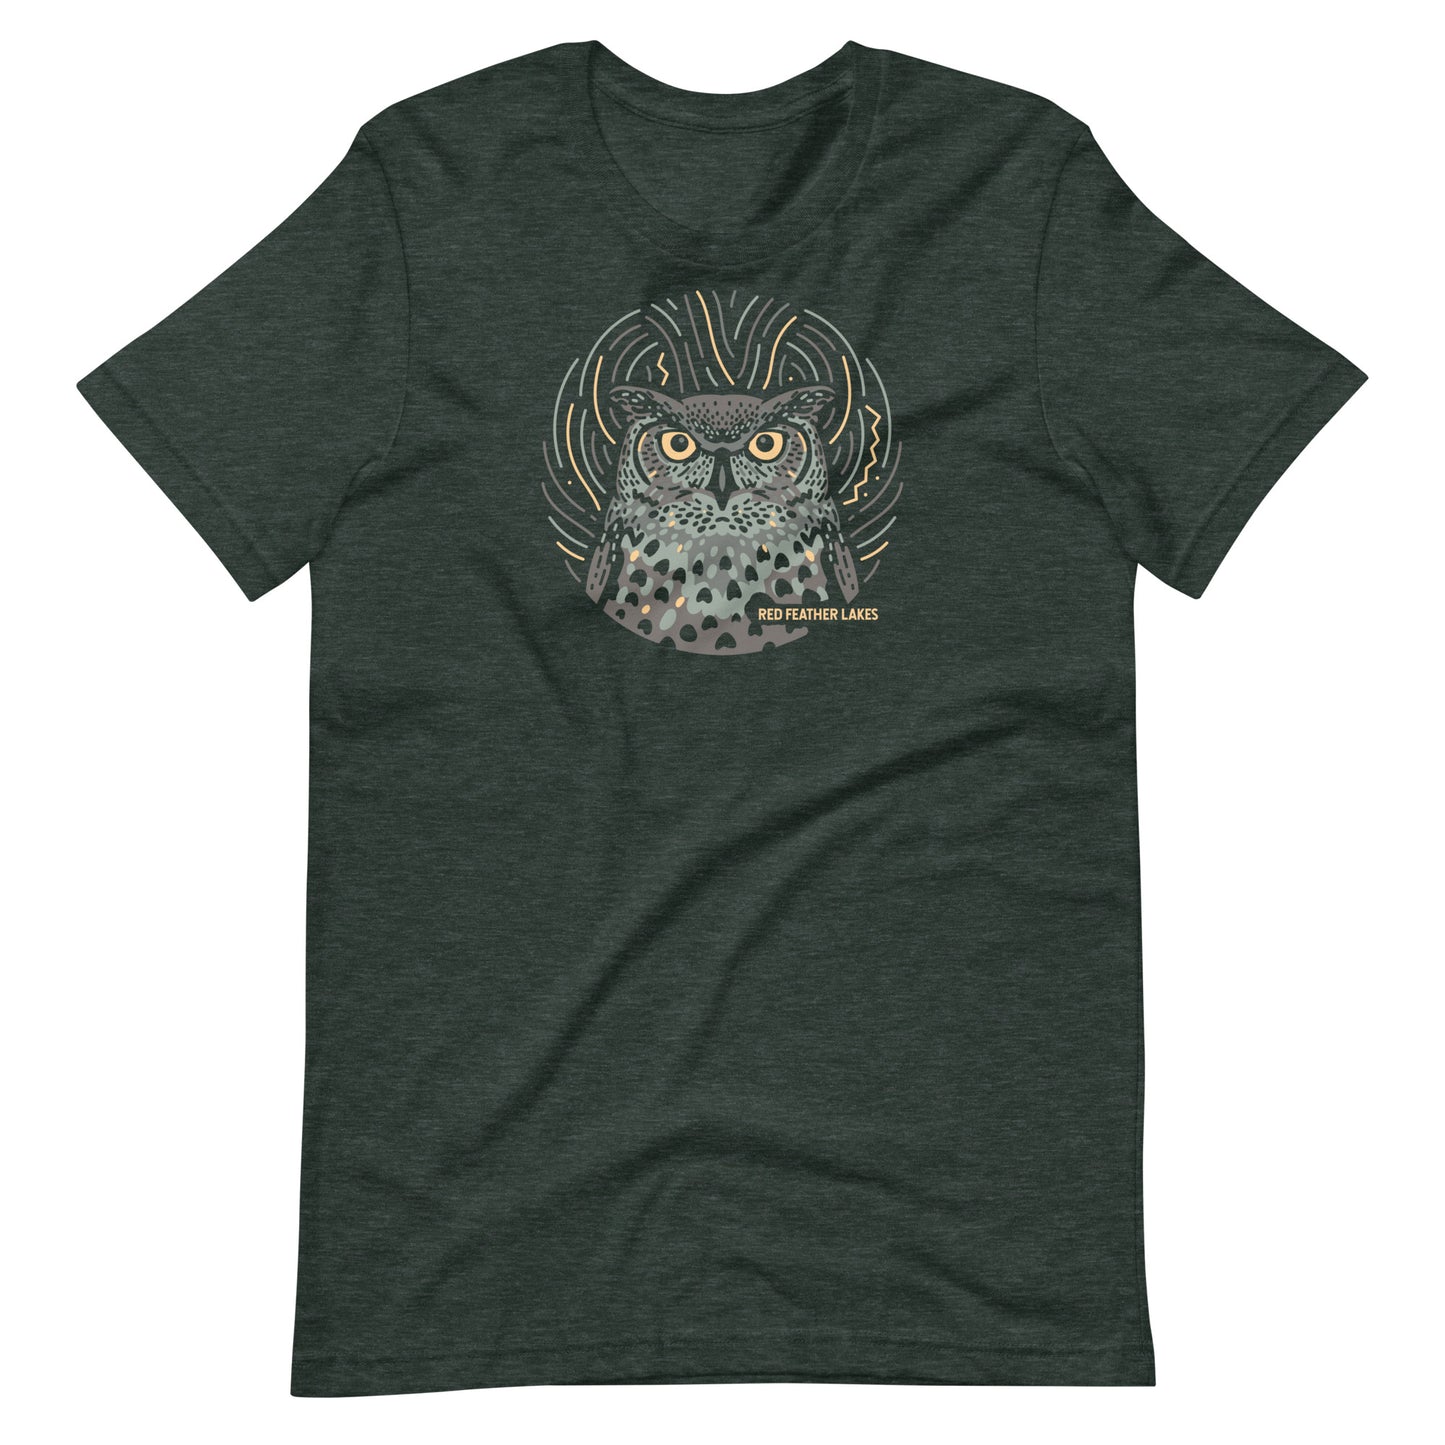 Bella Canvas 3001 t-shirt in Heather color with a detailed depiction of an owl, symbolic of Colorado's rich wildlife.